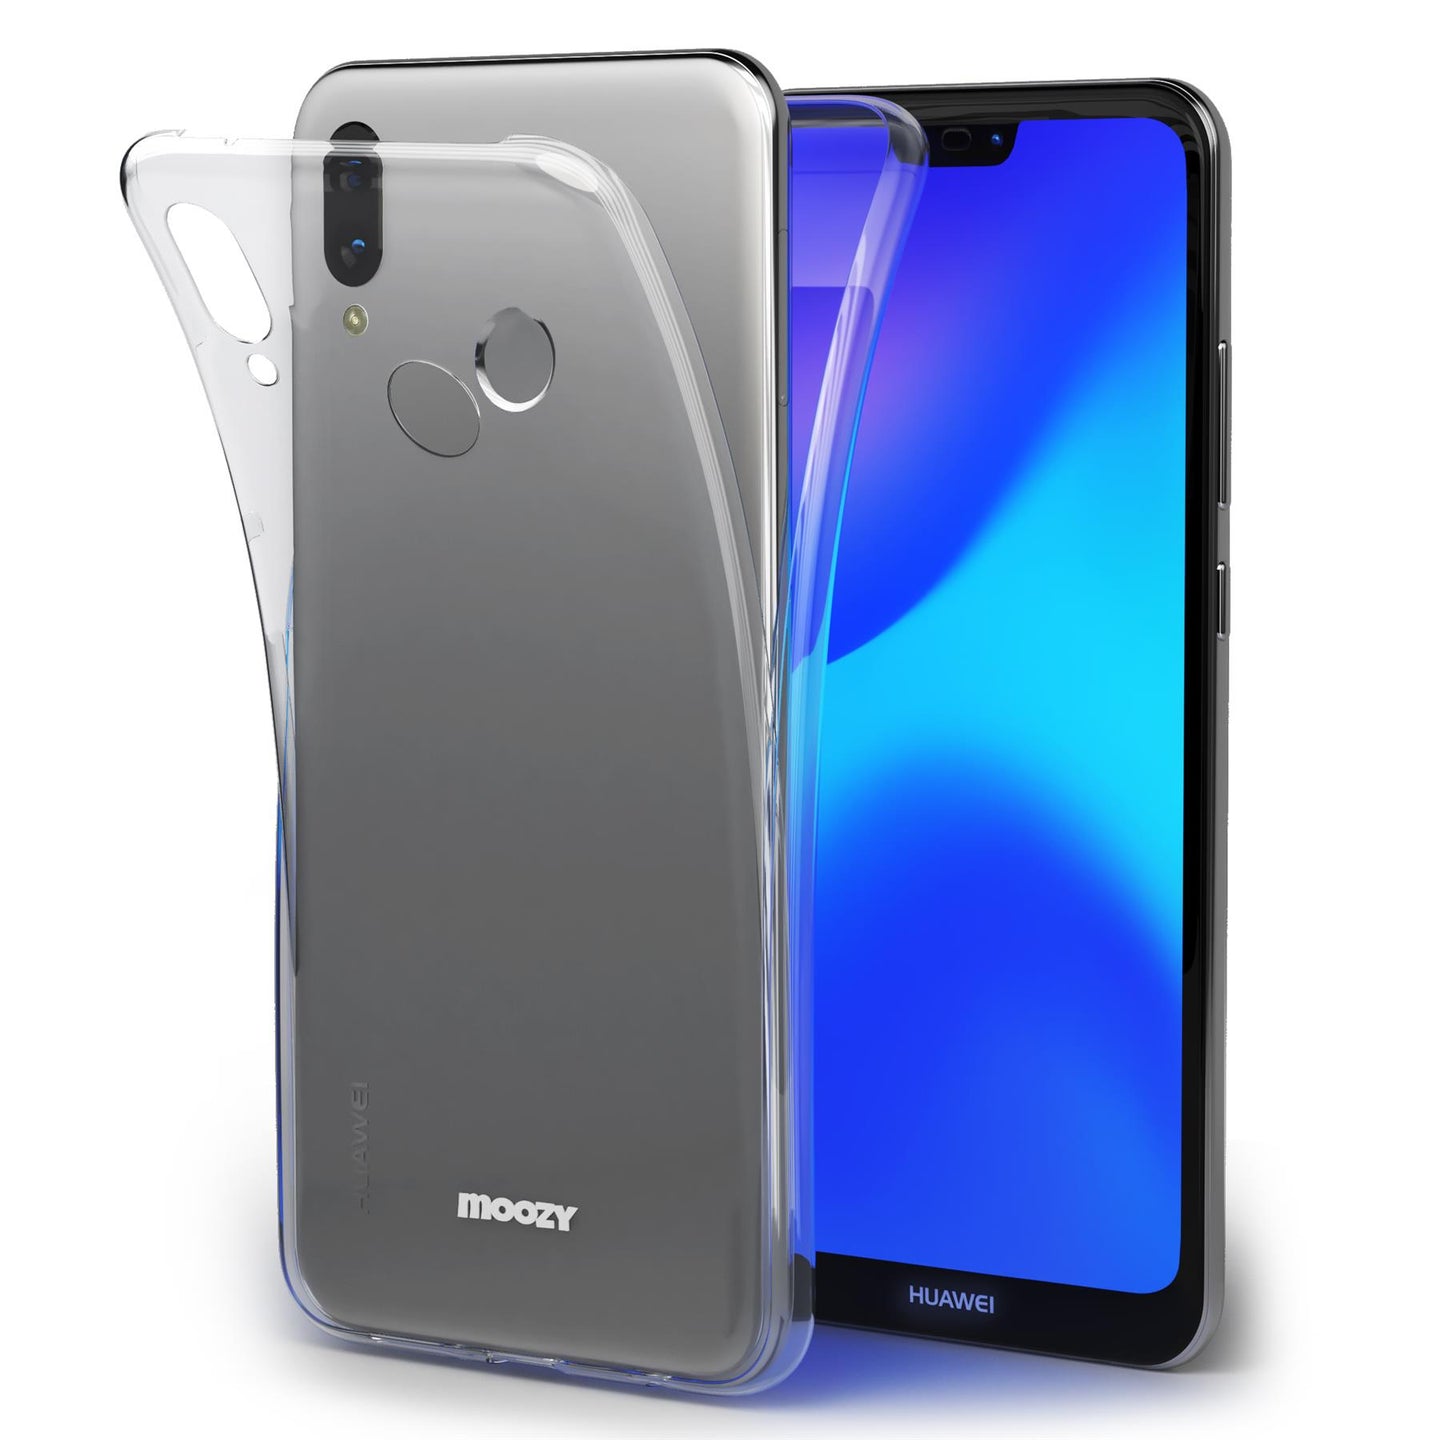 Moozy 360 Degree Case for Huawei P20 Lite - Full body Front and Back Slim Clear Transparent TPU Silicone Gel Cover